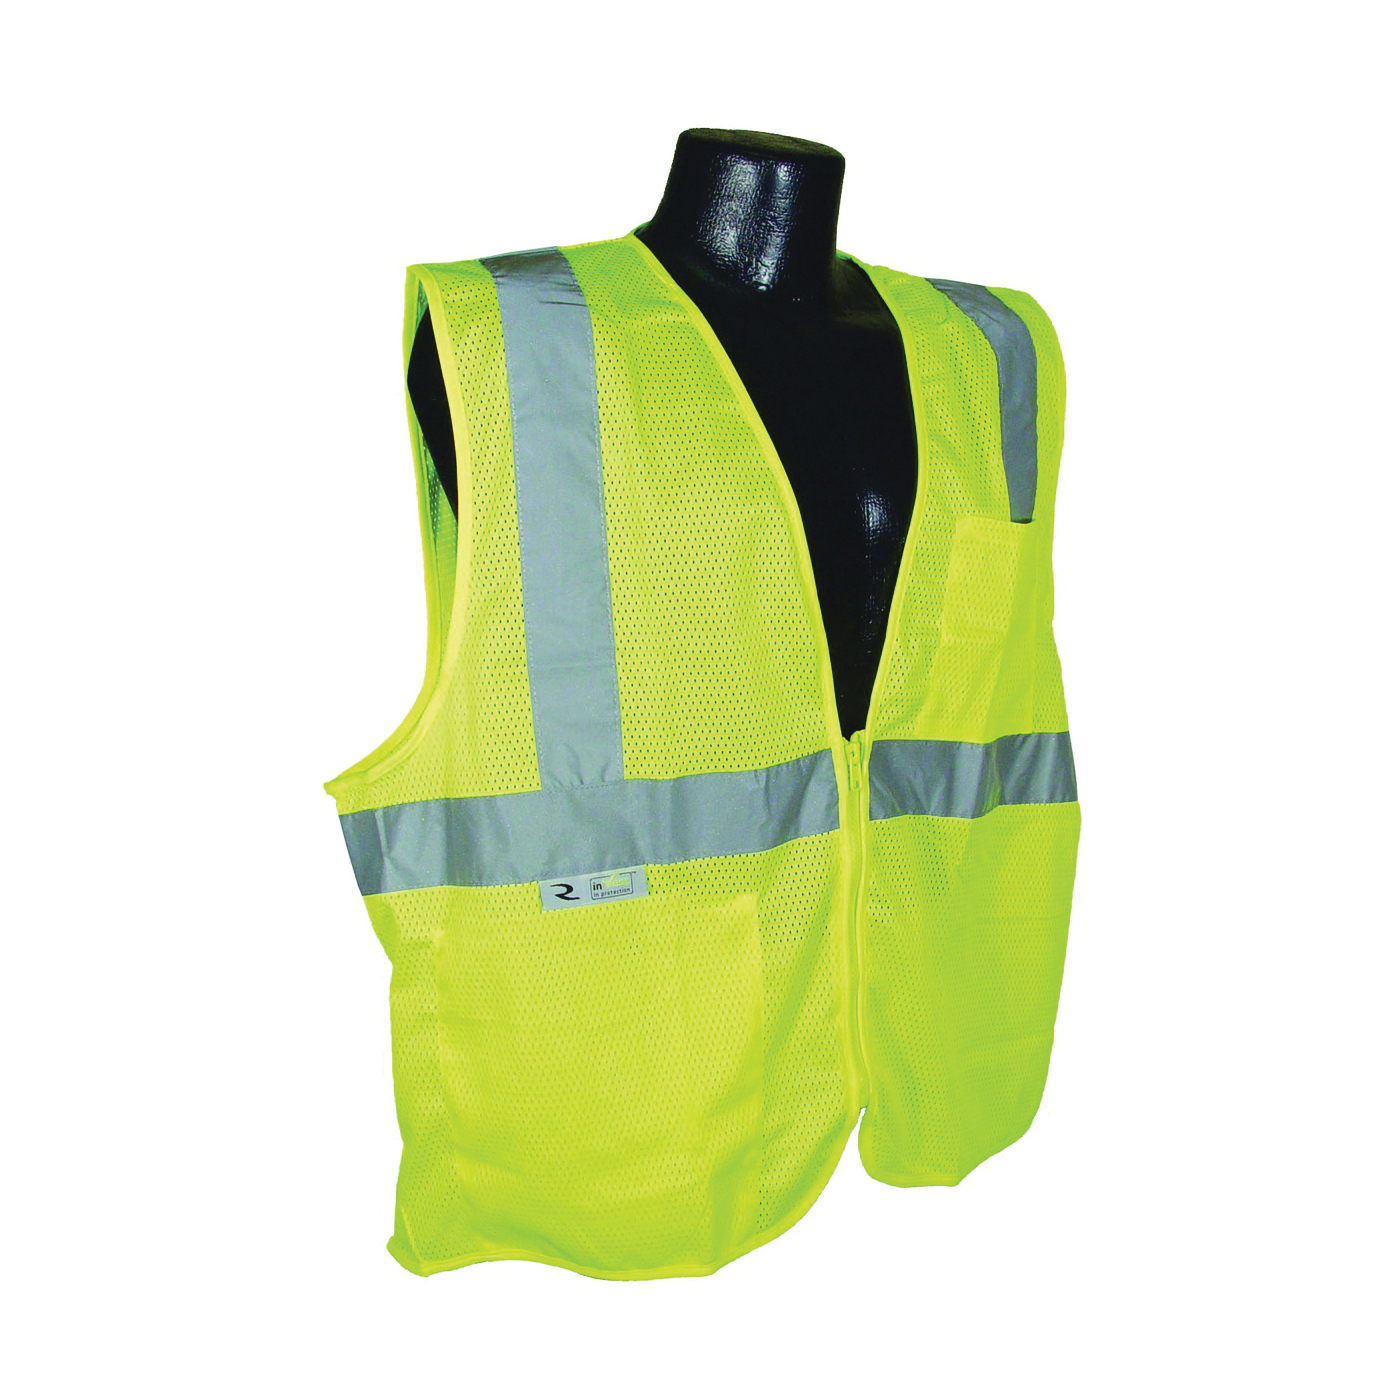 SV2ZGM-2X Economical Safety Vest, 2XL, Unisex, Fits to Chest Size: 30 in, Polyester, Green/Silver